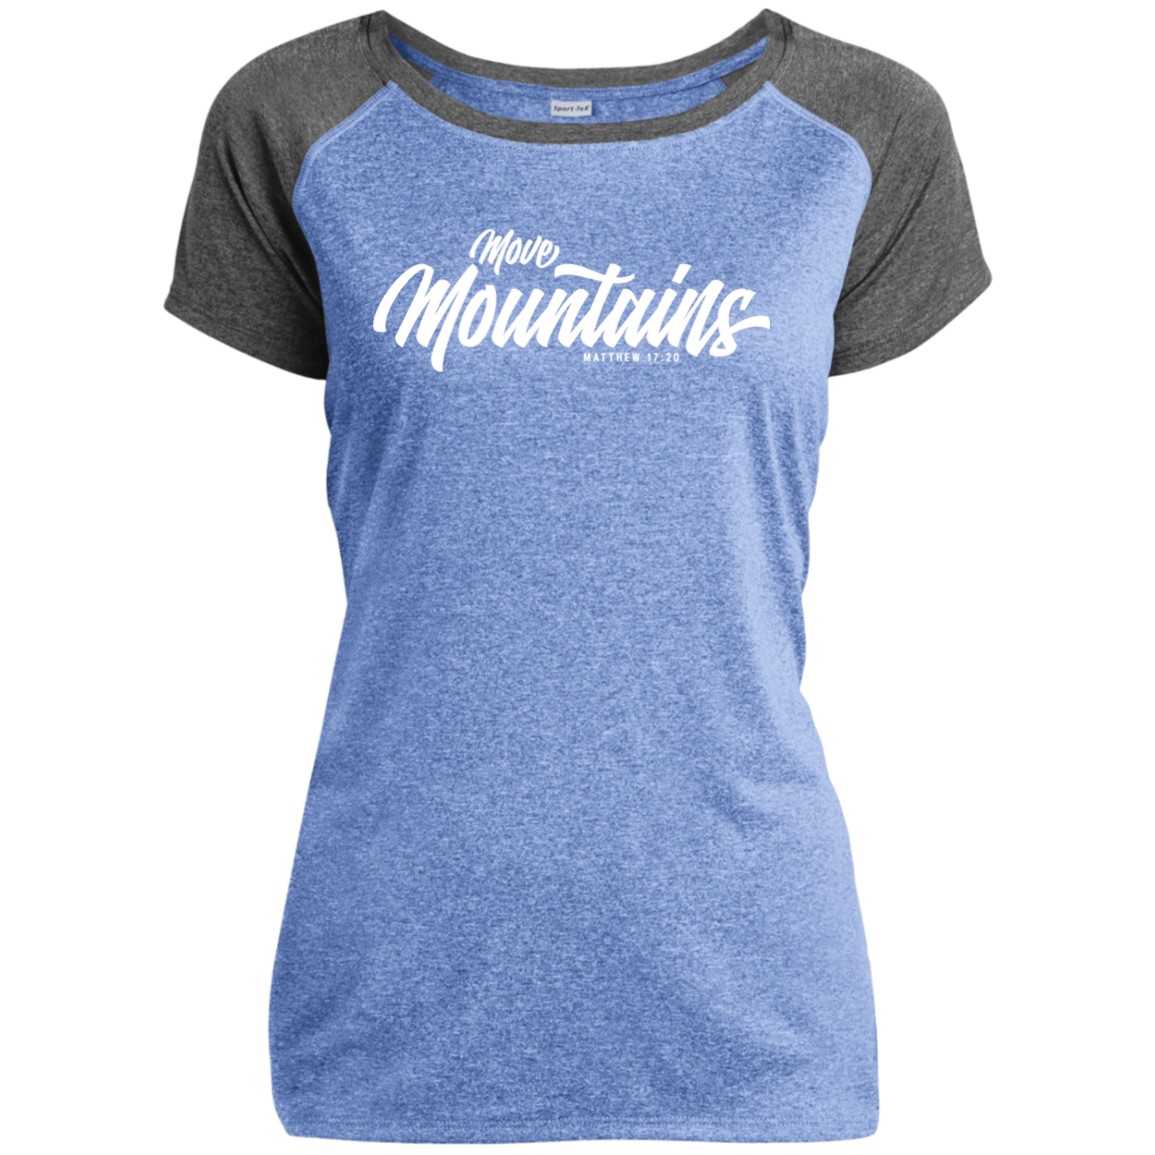 Move Mountains | Ladies’ Heather Performance T-Shirt